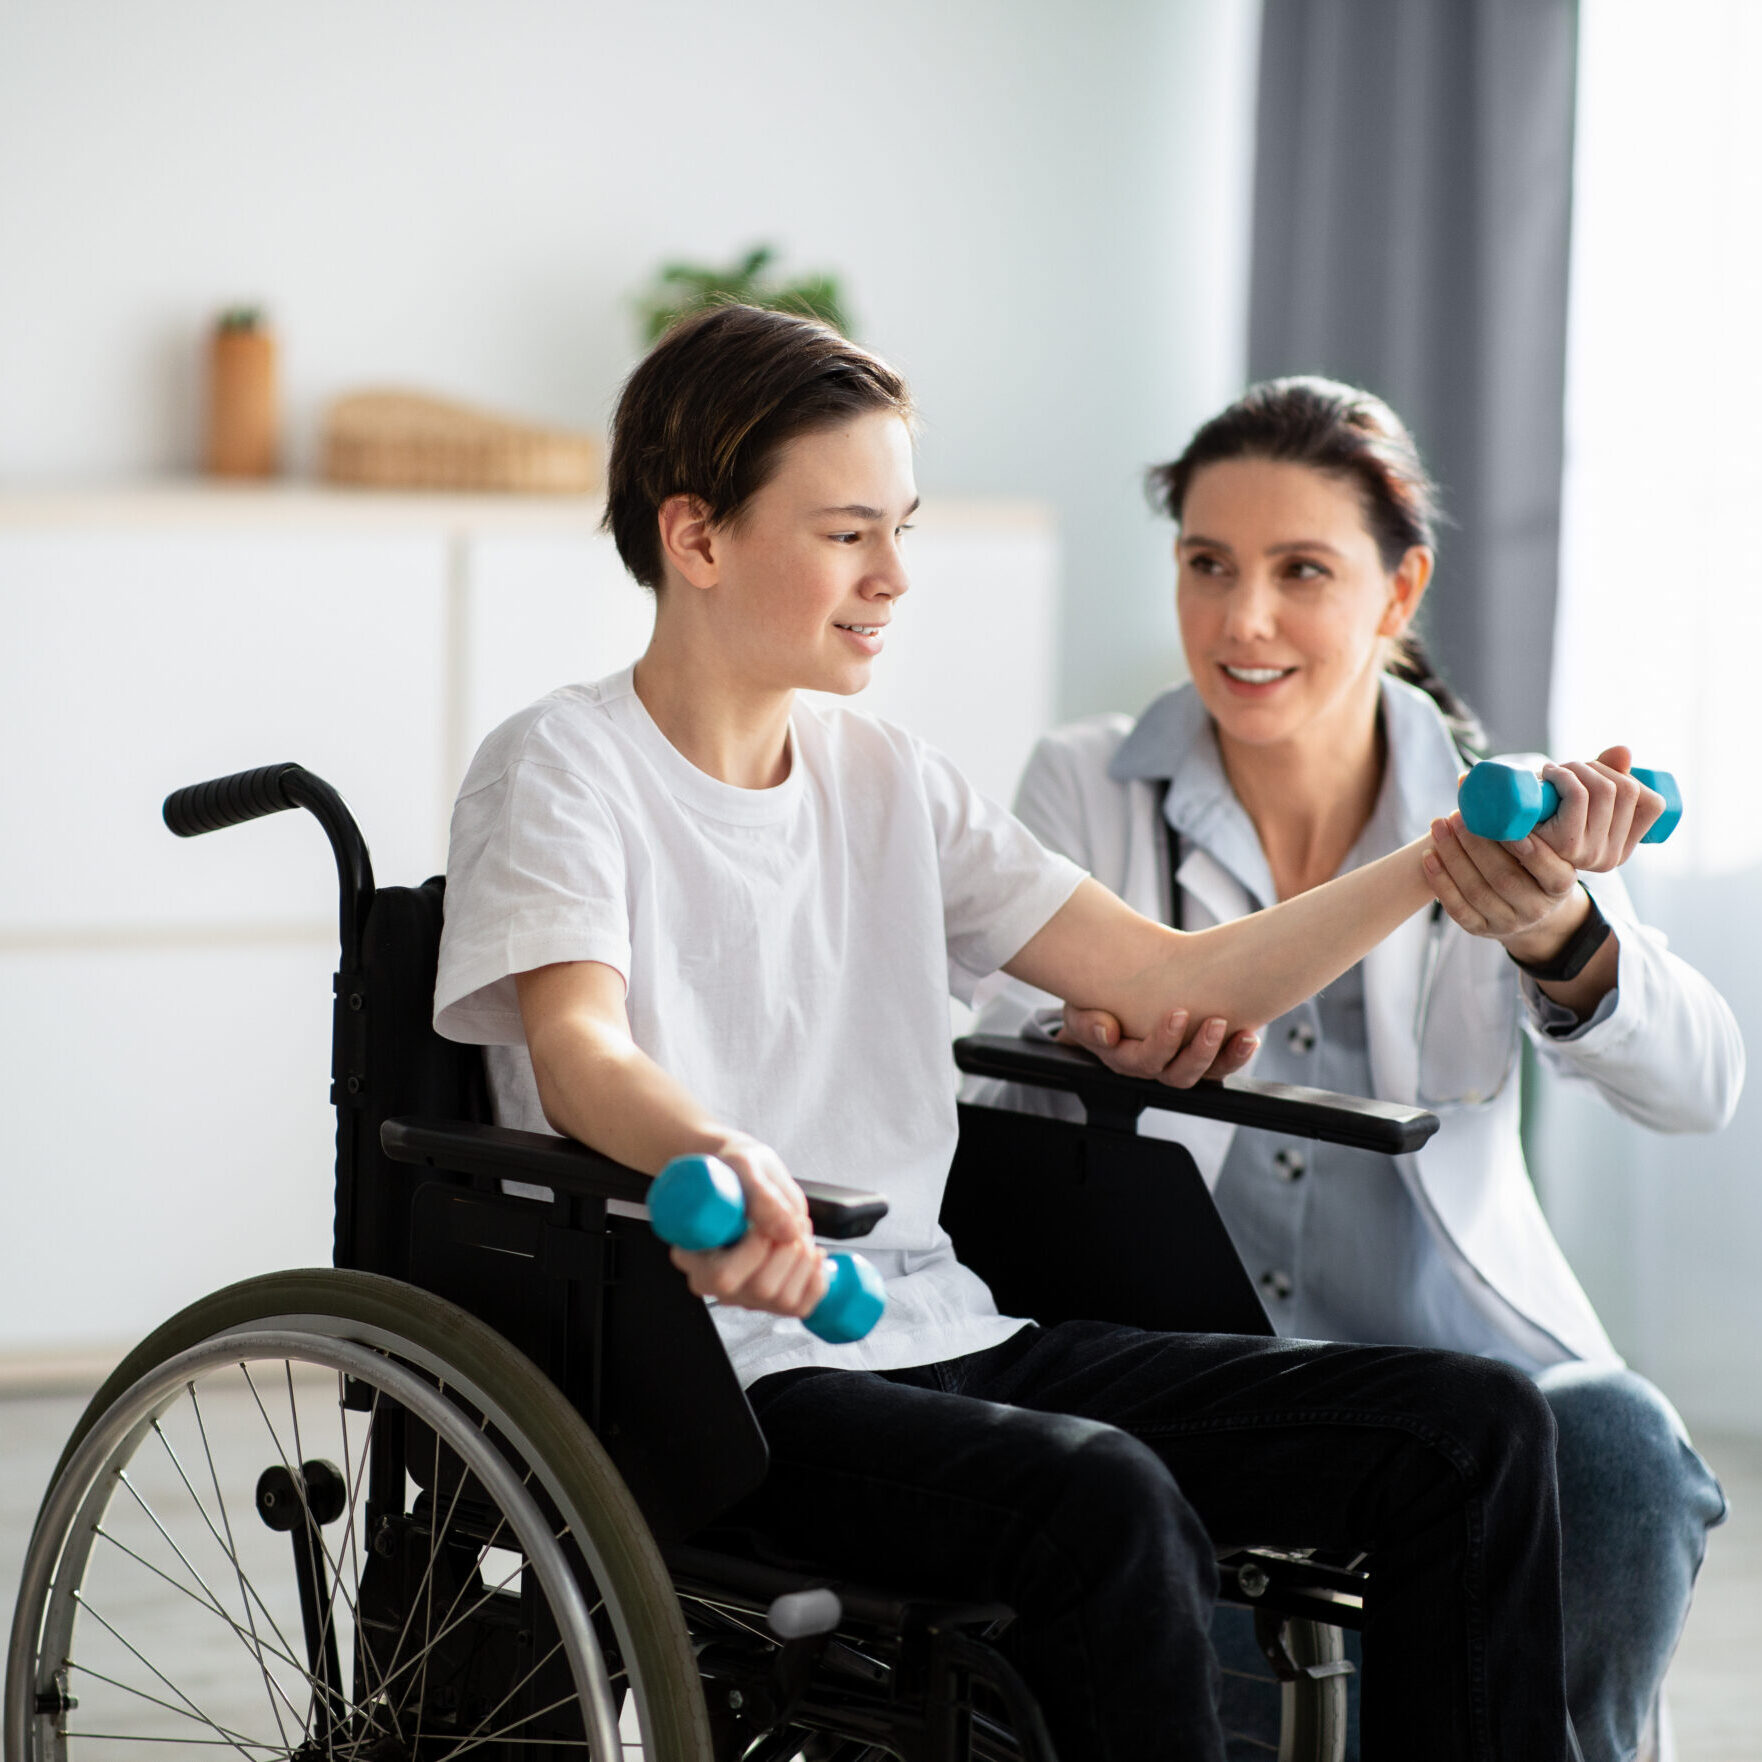 Physical rehabilitation concept. Young physiotherapist helping teenage boy in wheelchair to do exercises at home. Disabled adolescent training with dumbbells, working out his muscles indoors